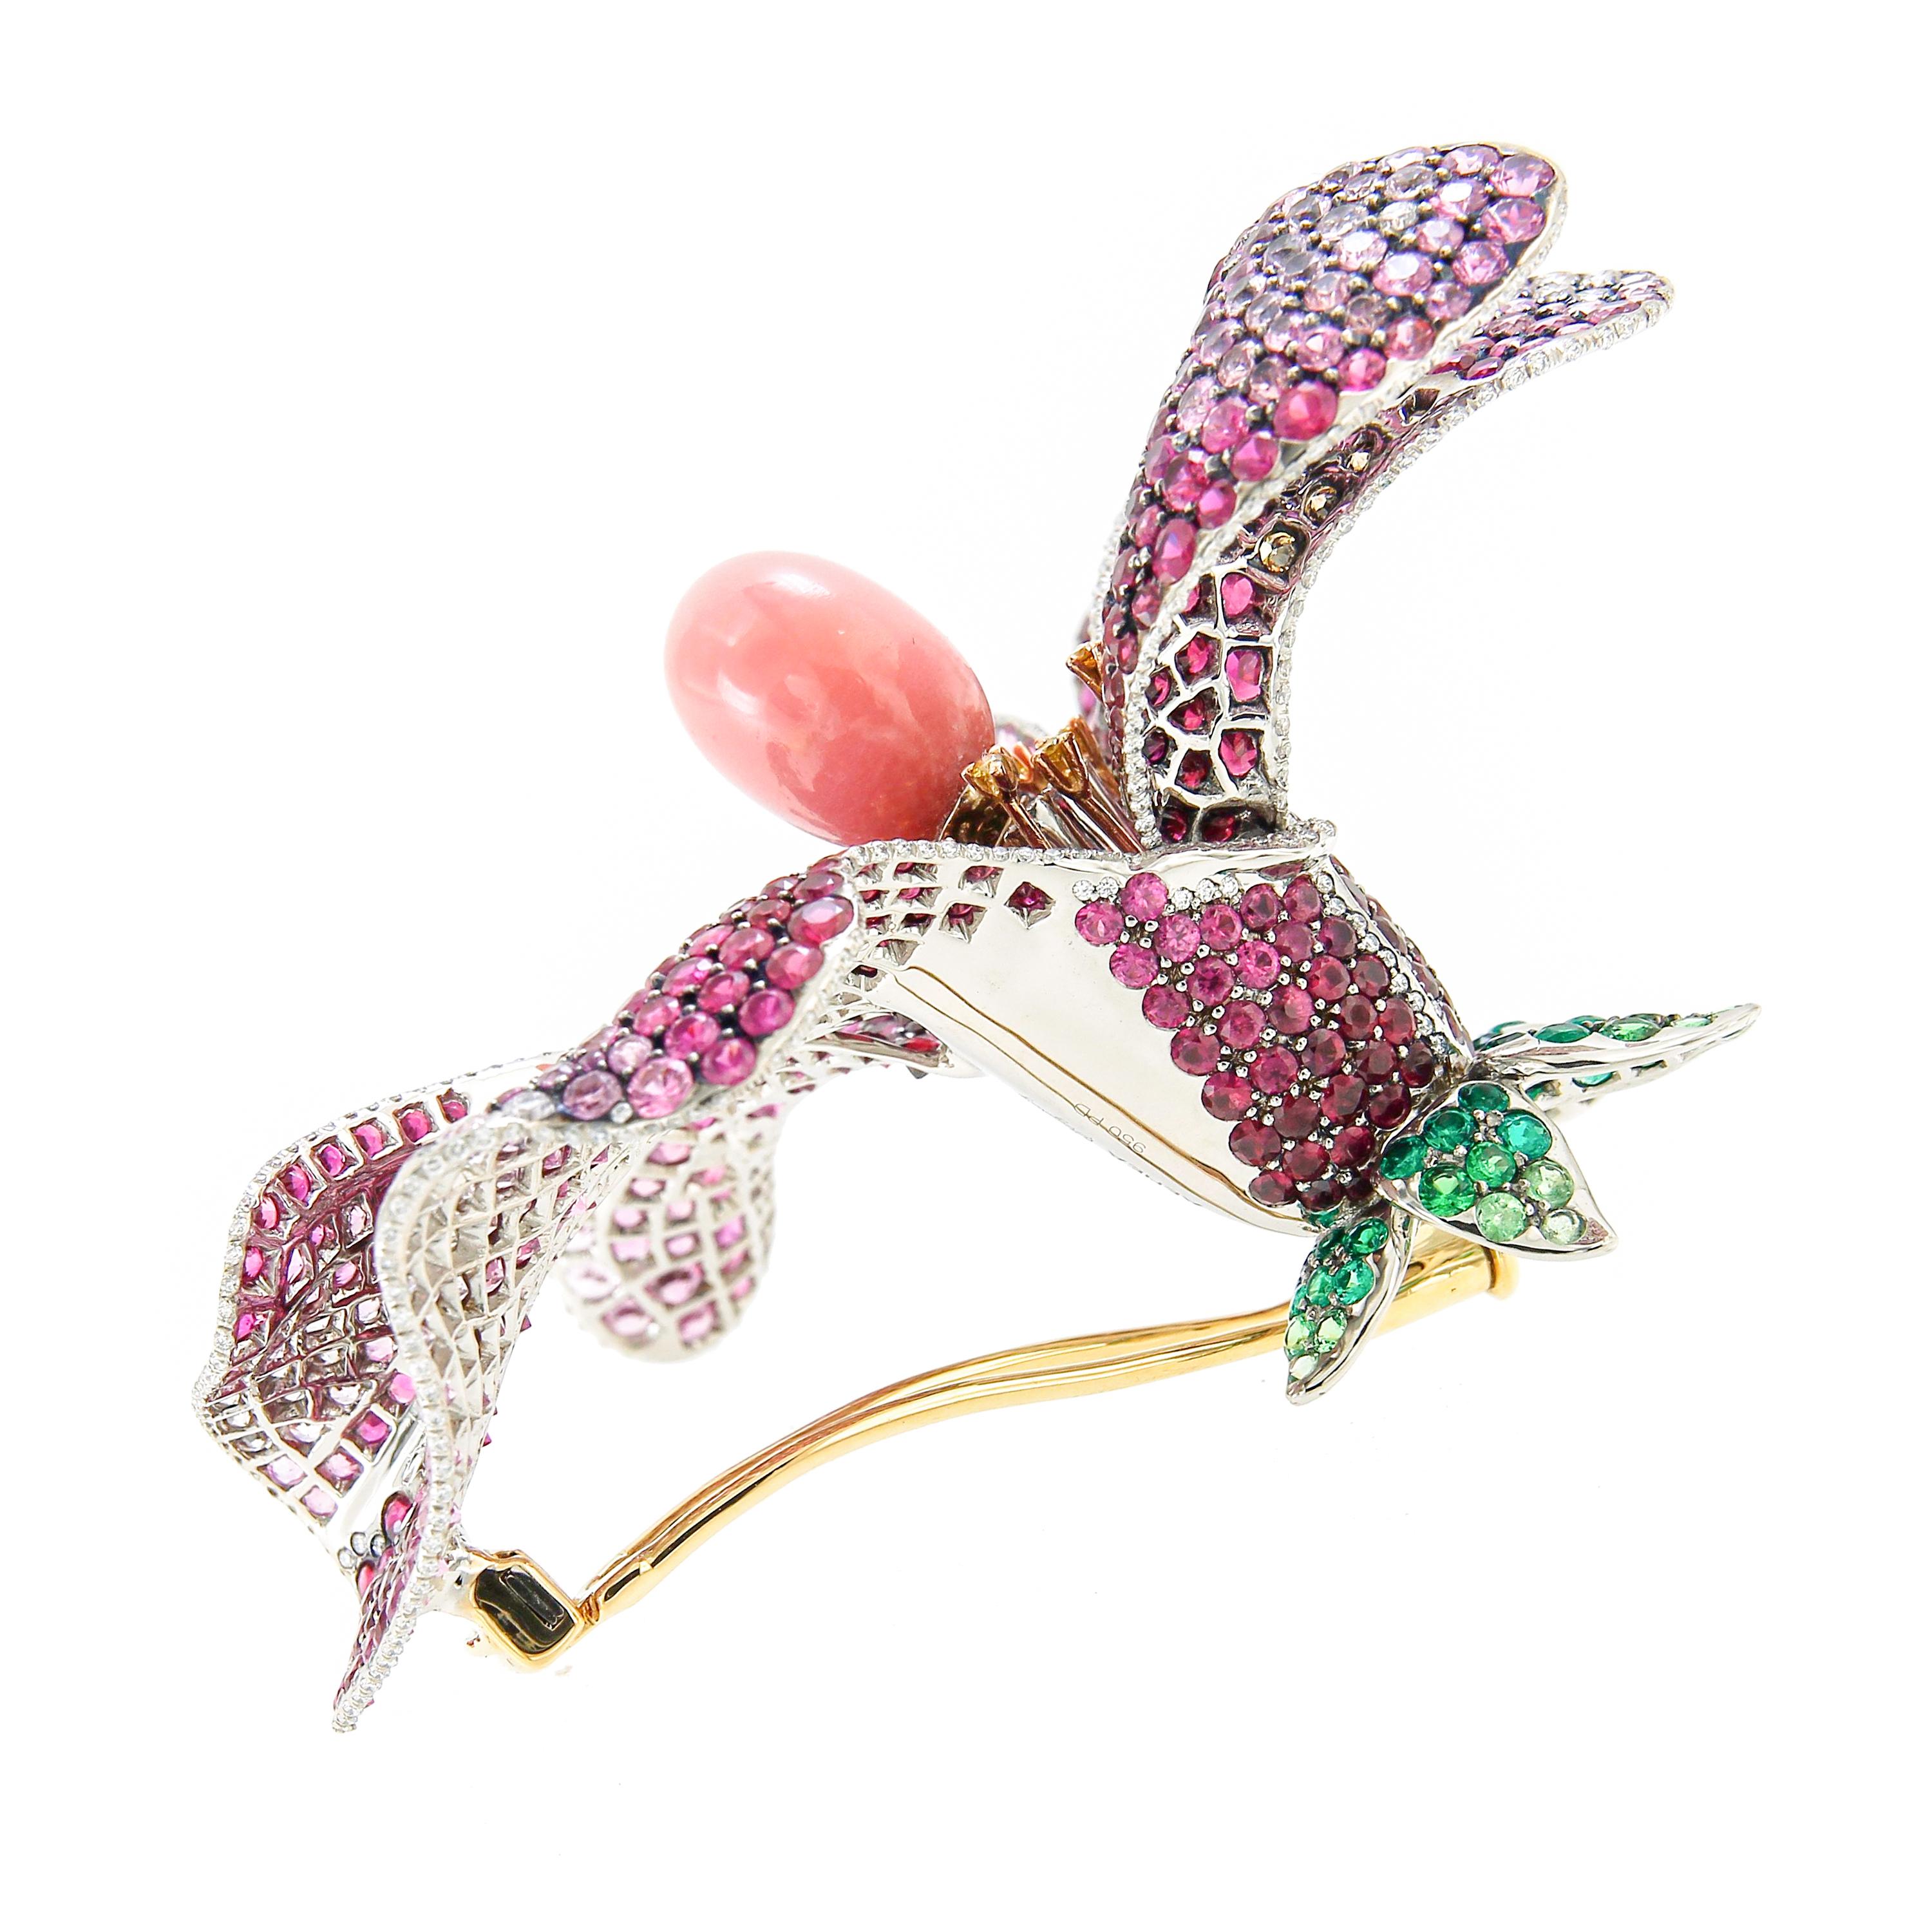 AENEA GIA Cert. 7.75ct. Conch Pearl 18k Gold Rubies Diamonds Trembling Brooch For Sale 6